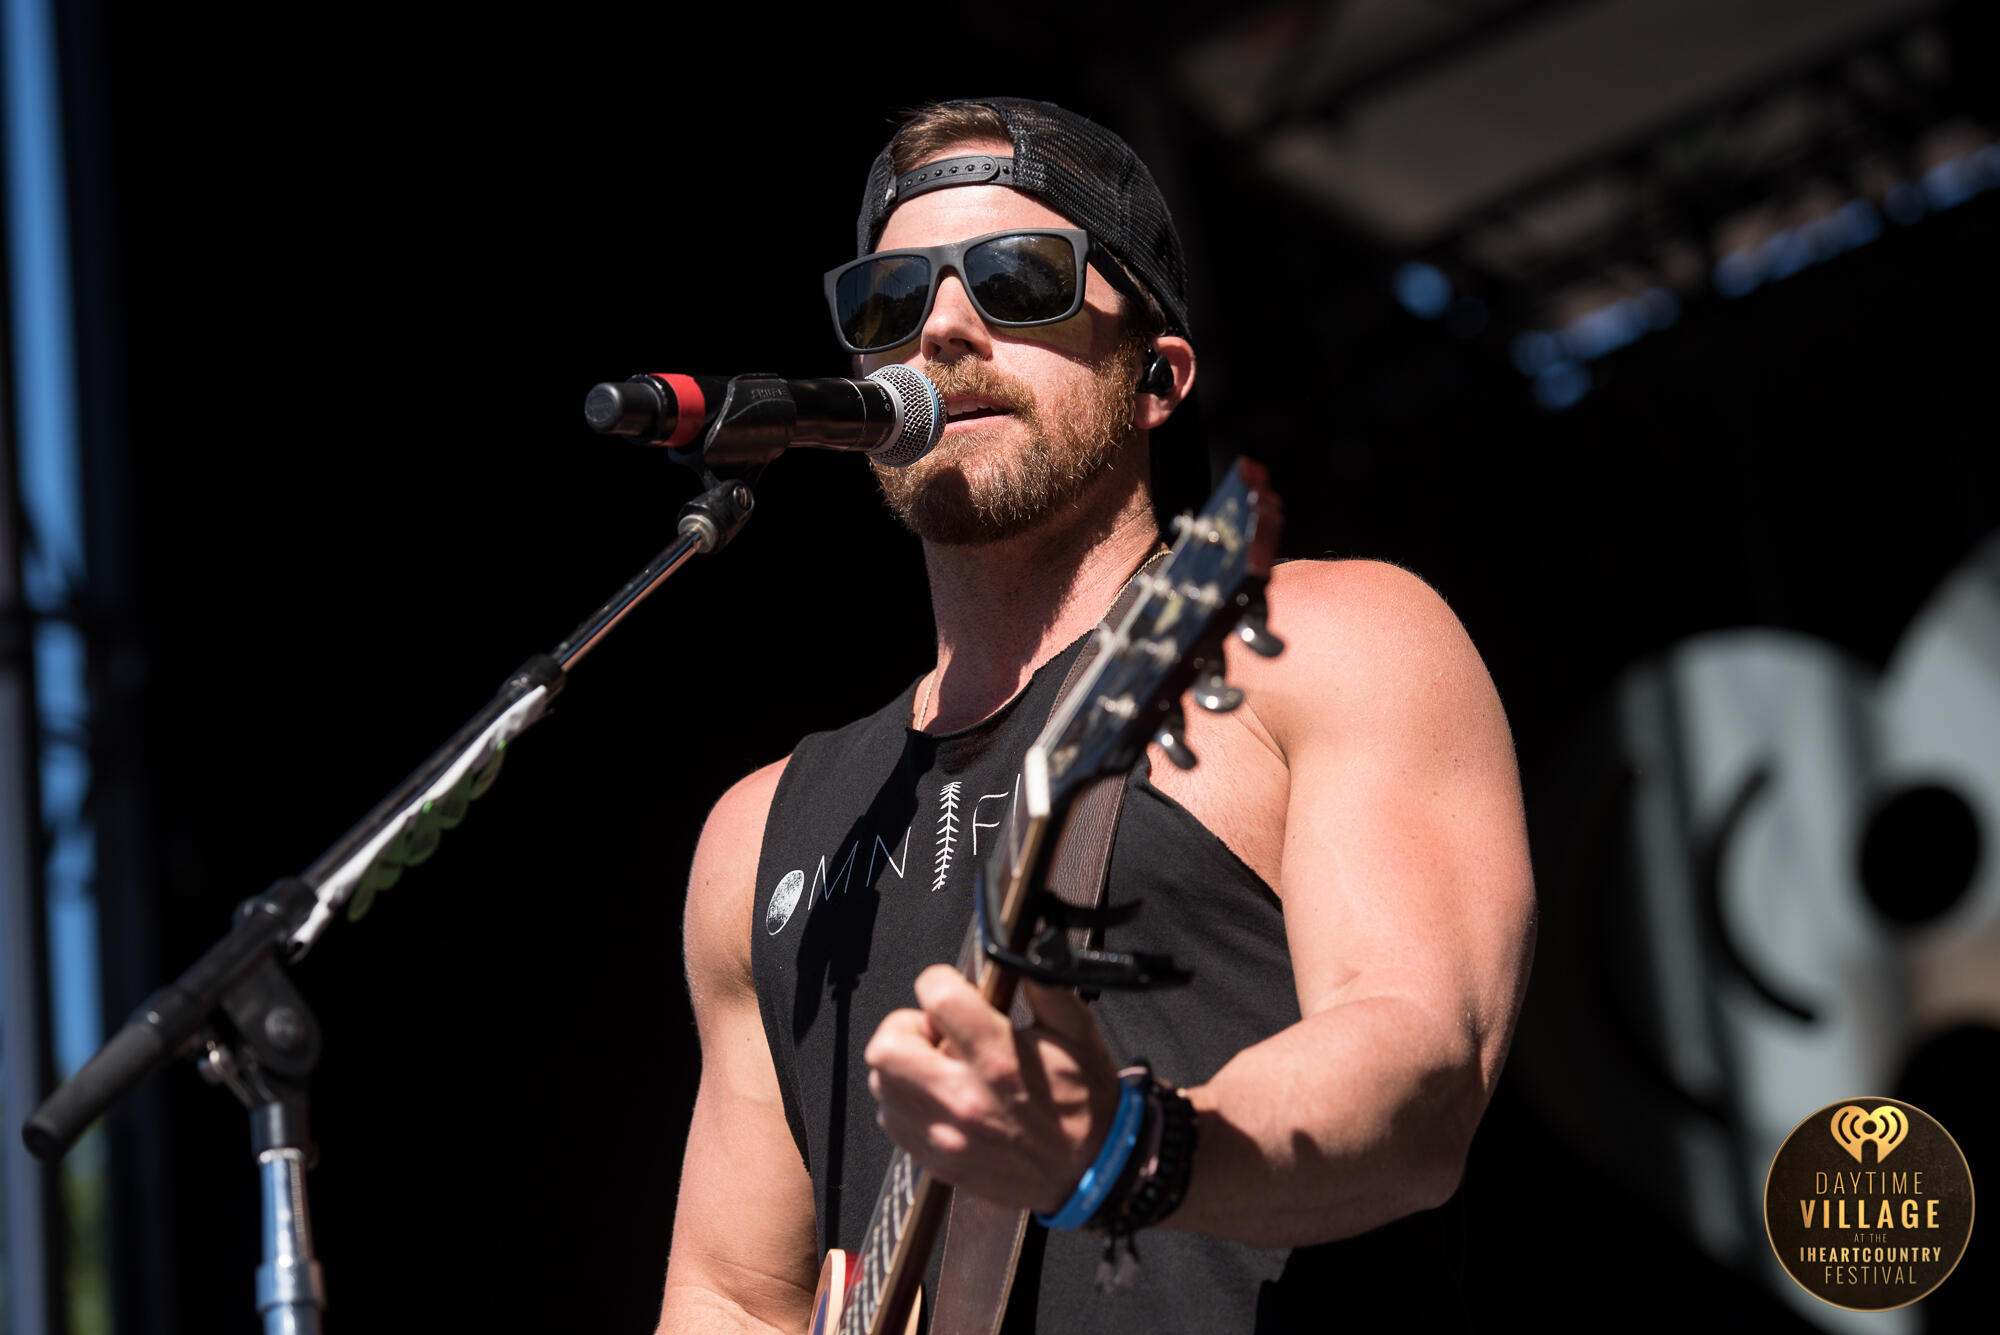 Kip Moore performs live during the 2017 Daytime Village at the iHeartCountry Festival, A Music Experience by AT&T at the Frank Erwin Center on May 6, 2017 in Austin, Texas.    <p><strong><a href=